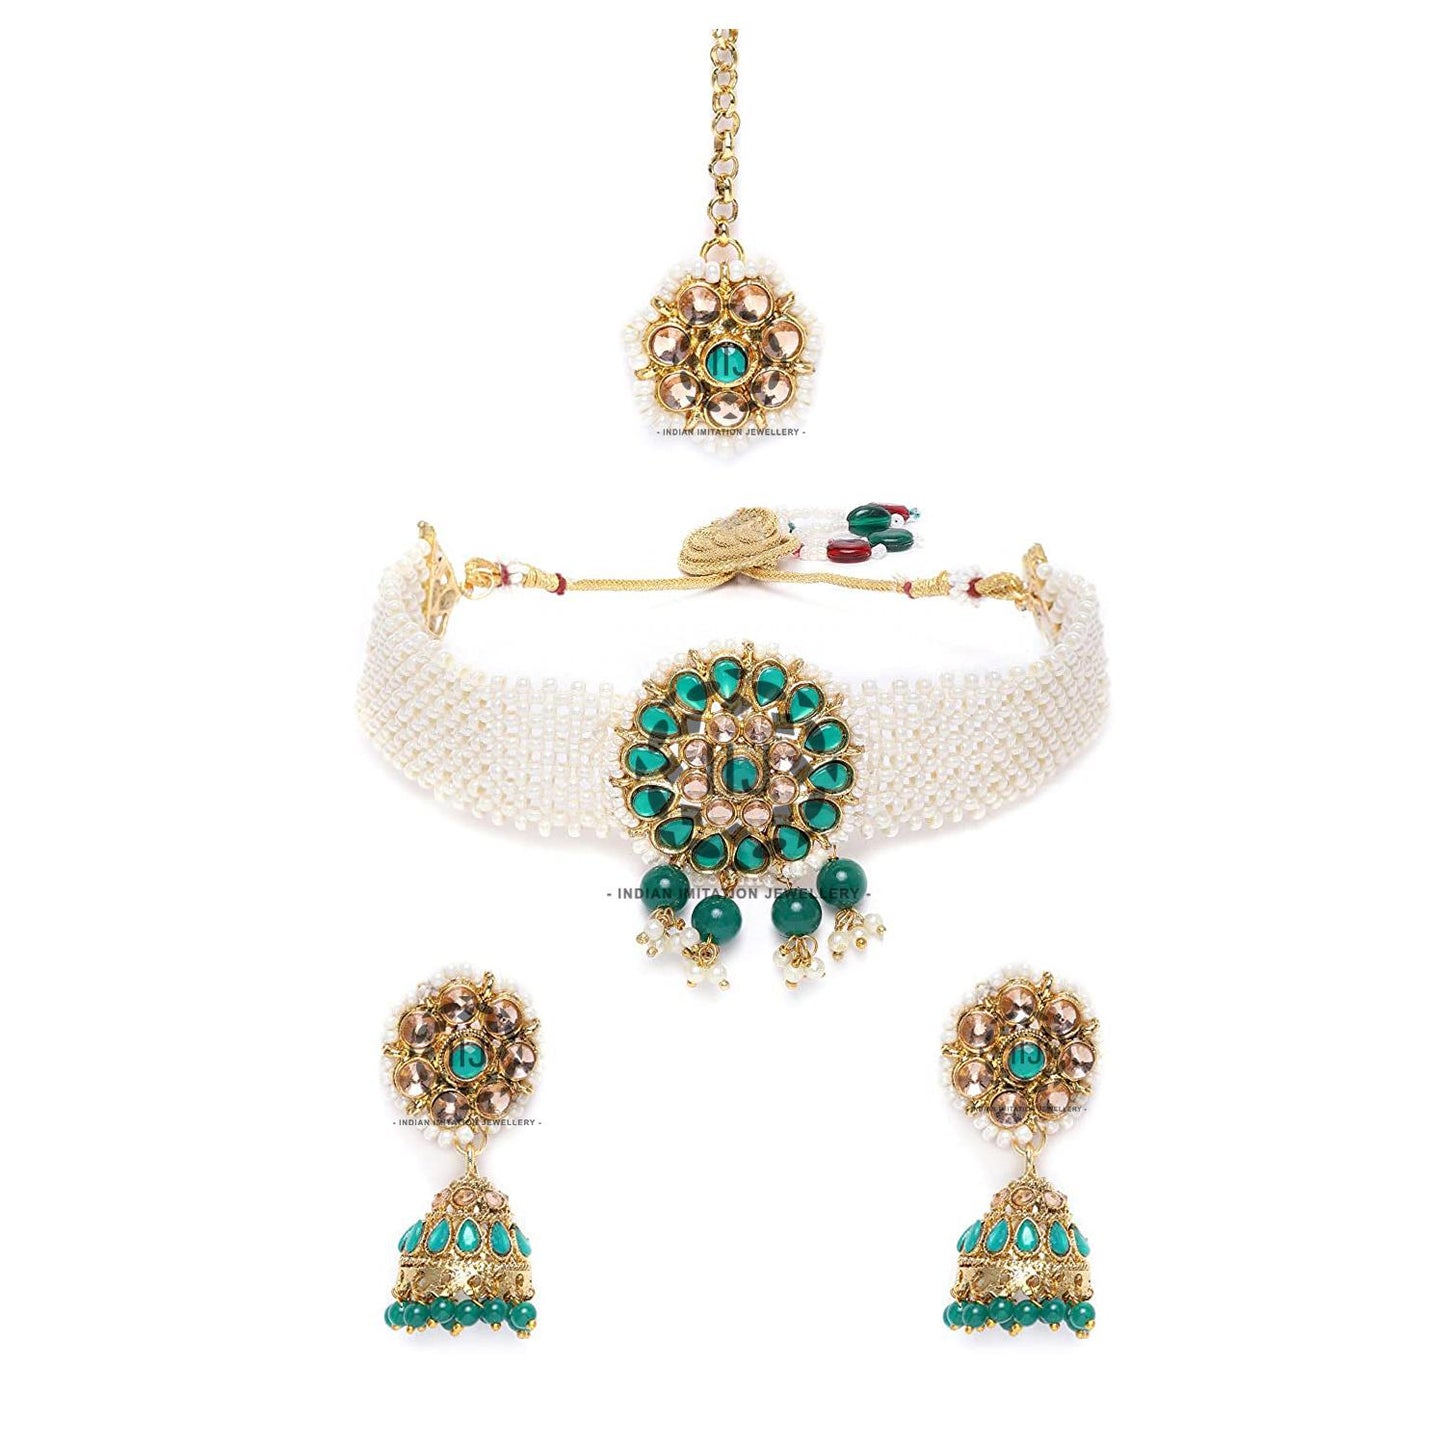 Well Crafted Chatai concept Necklace/Choker Set made by the tribal women of India